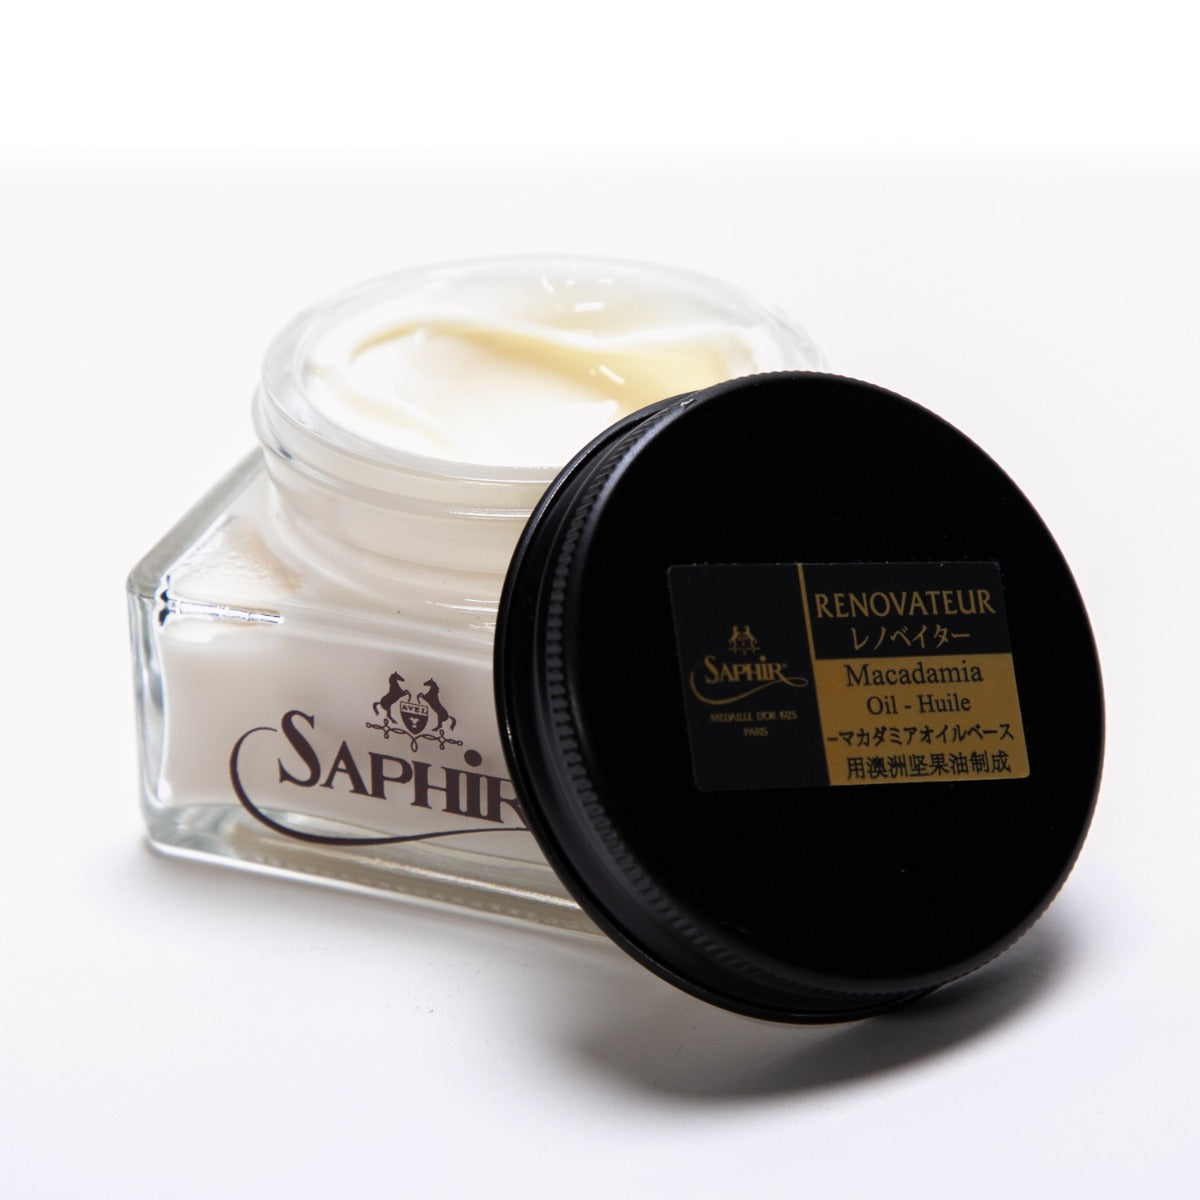 A jar of Saphir Renovateur w/ Macadamia Oil conditioner next to a white surface by KirbyAllison.com.